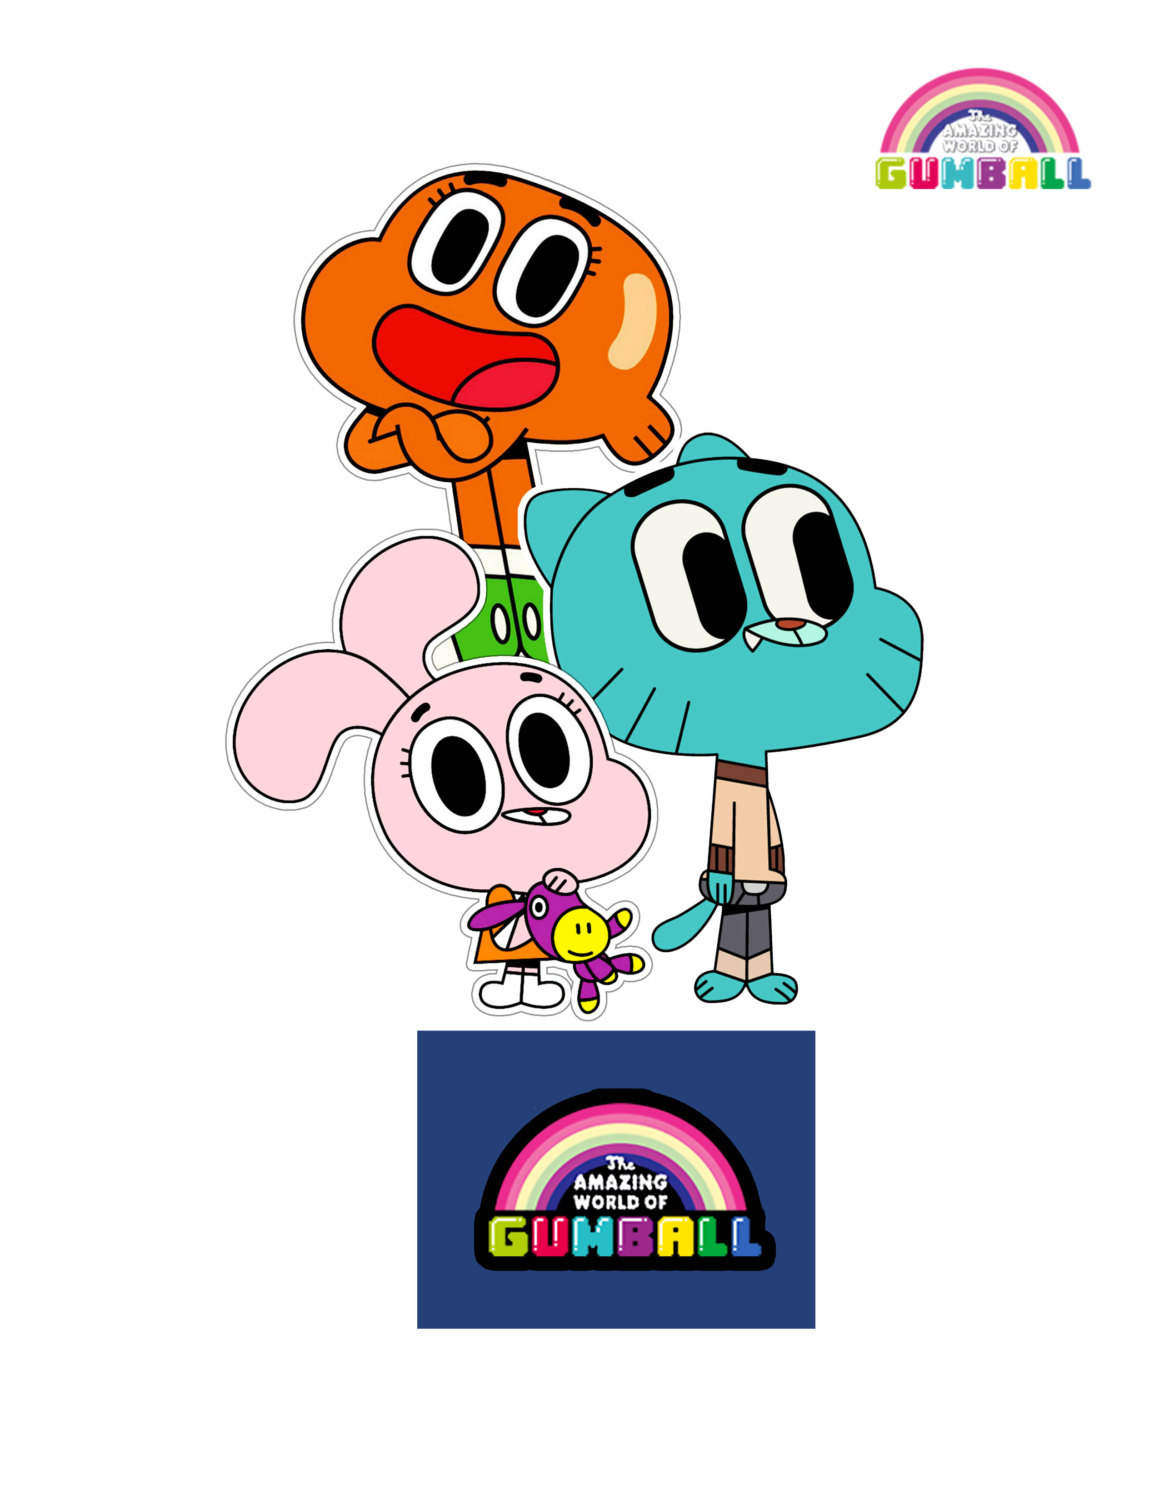 Popular items for the amazing world of gumball on Etsy